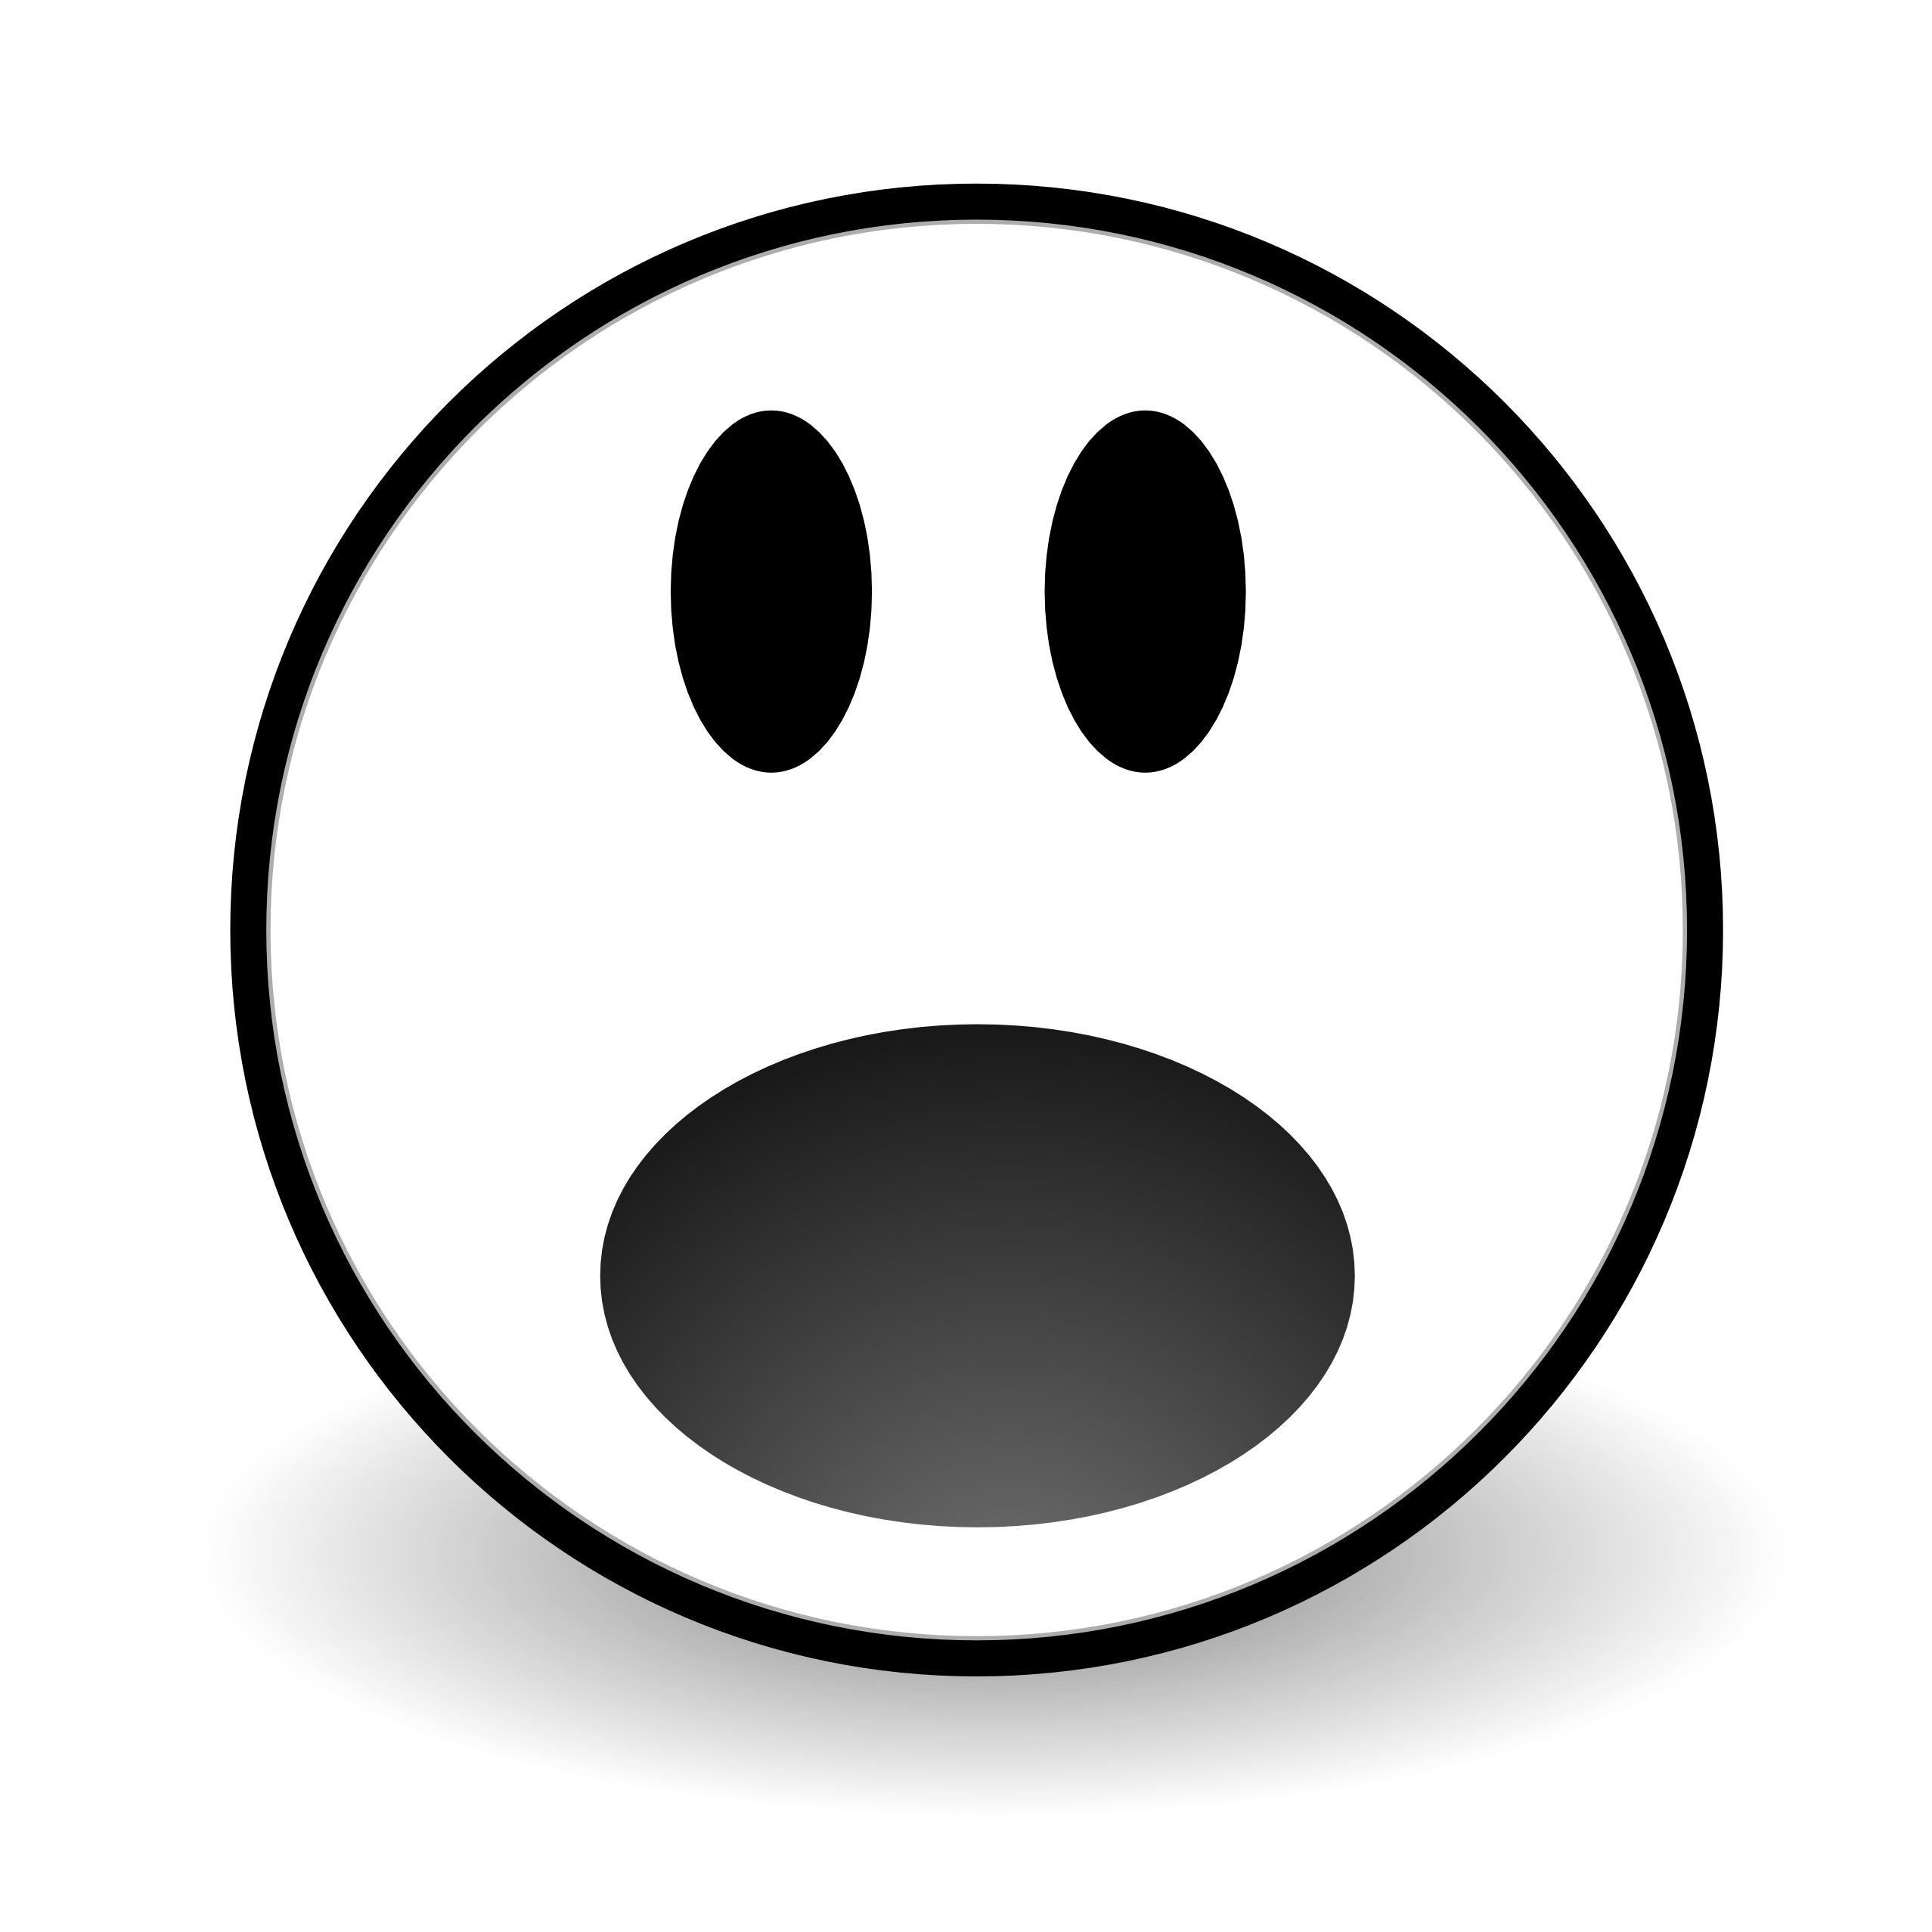 Angry Face Clipart Black And White - ClipArt Best